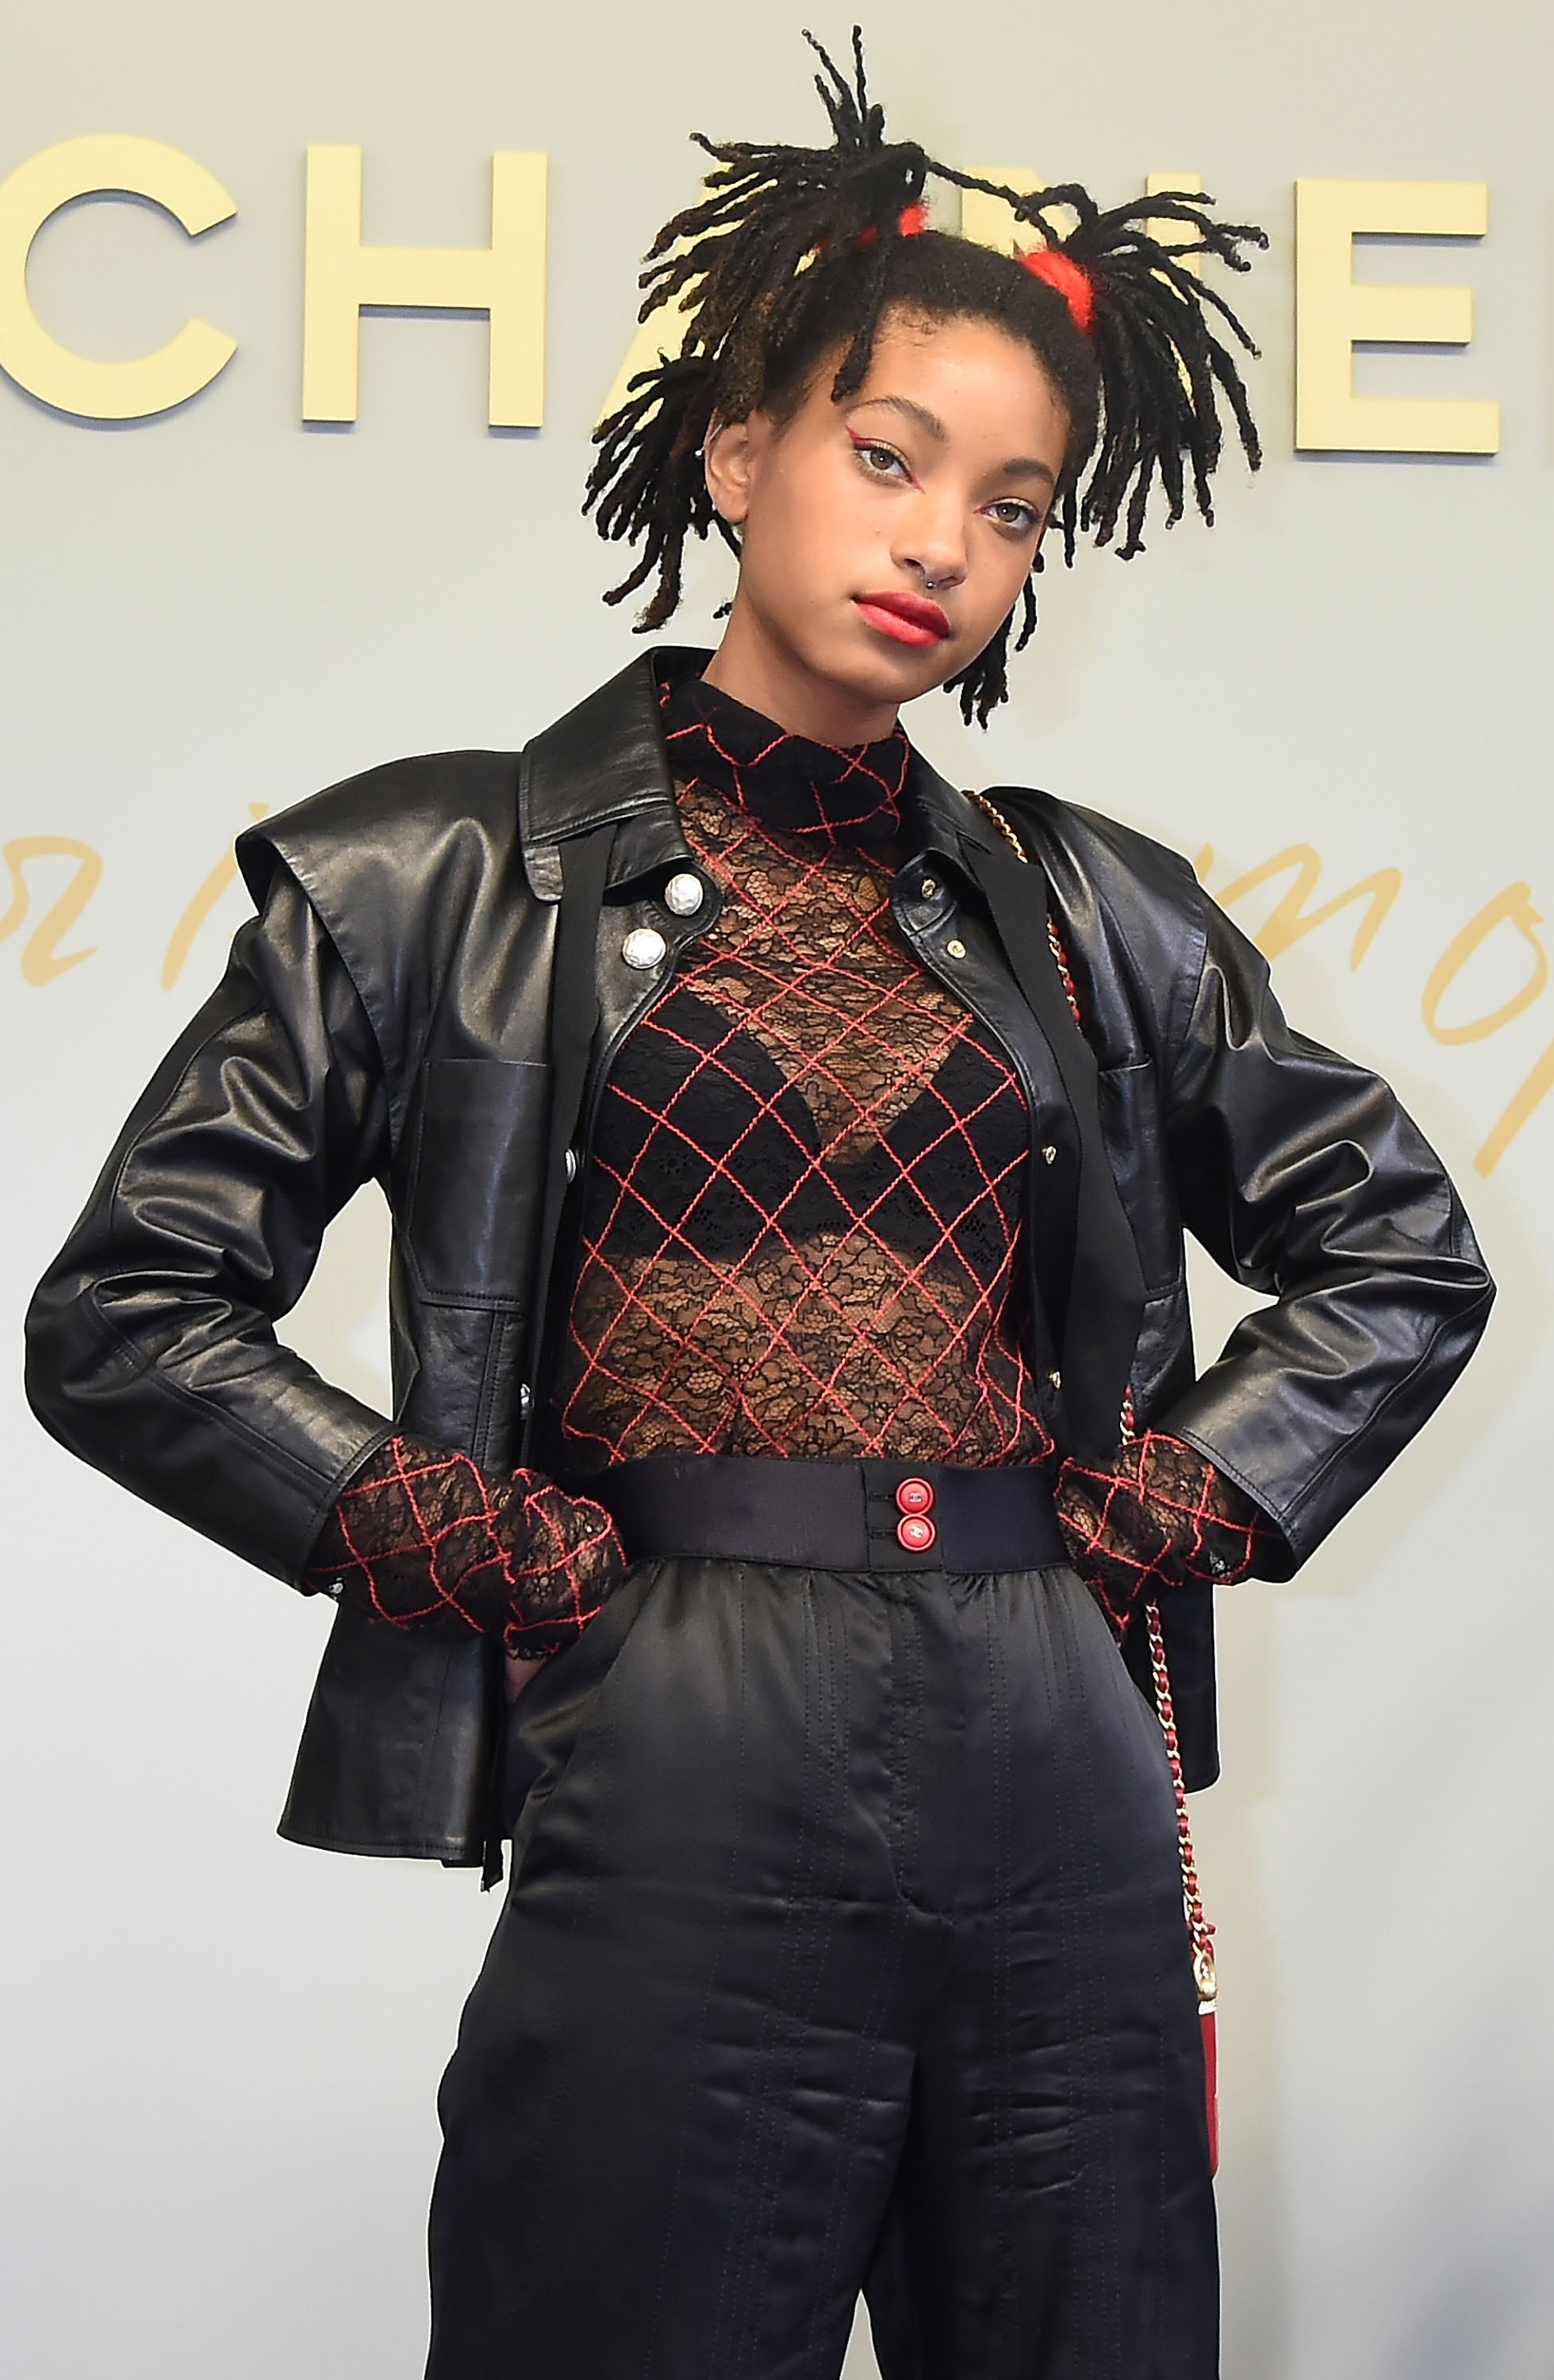 Yara Shahidi, Kevin Hart, Niecy Nash and More Celebs Out and About
